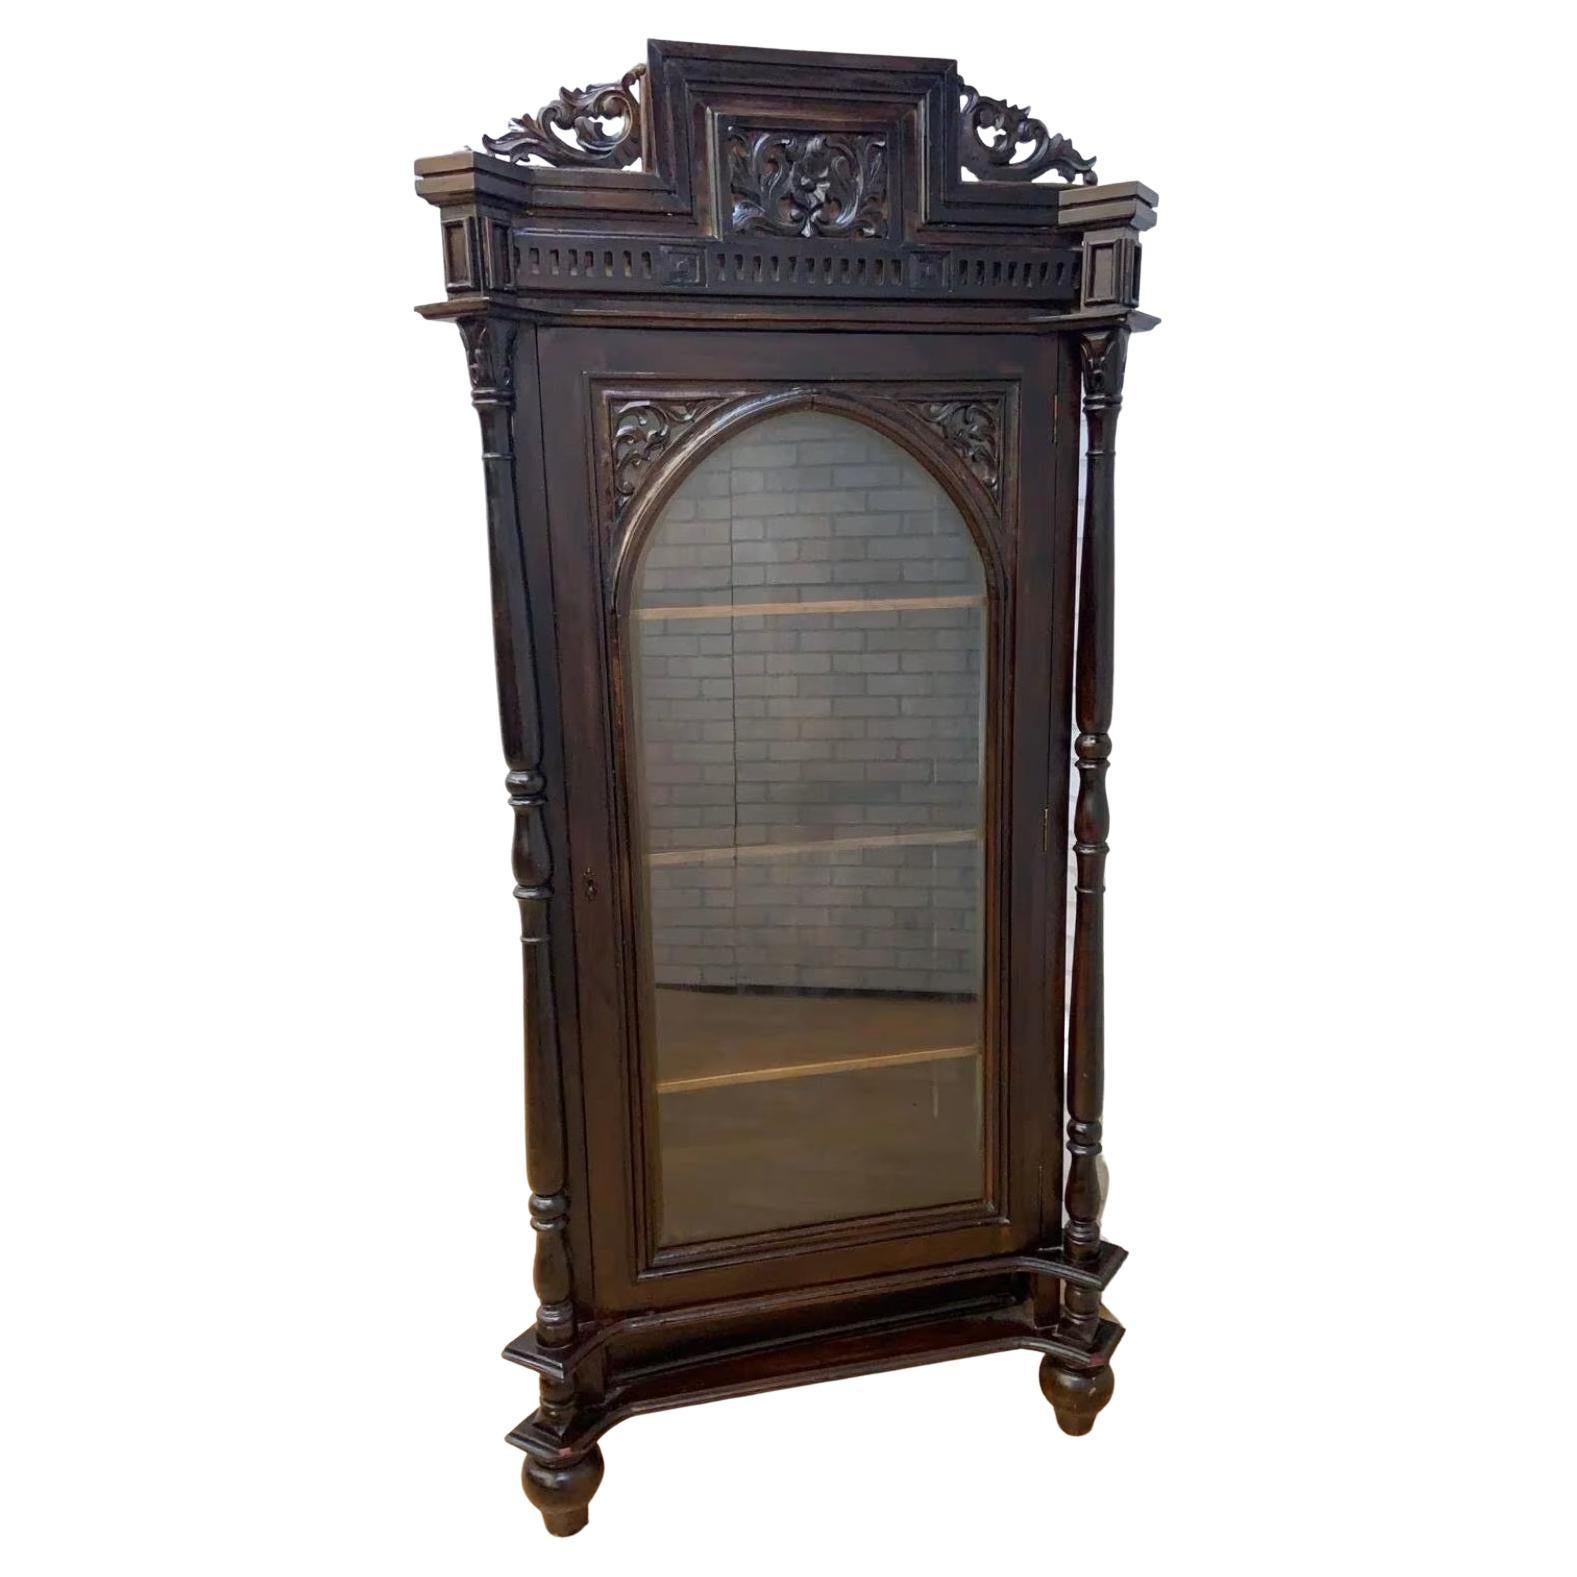 What is another name for a display cabinet?